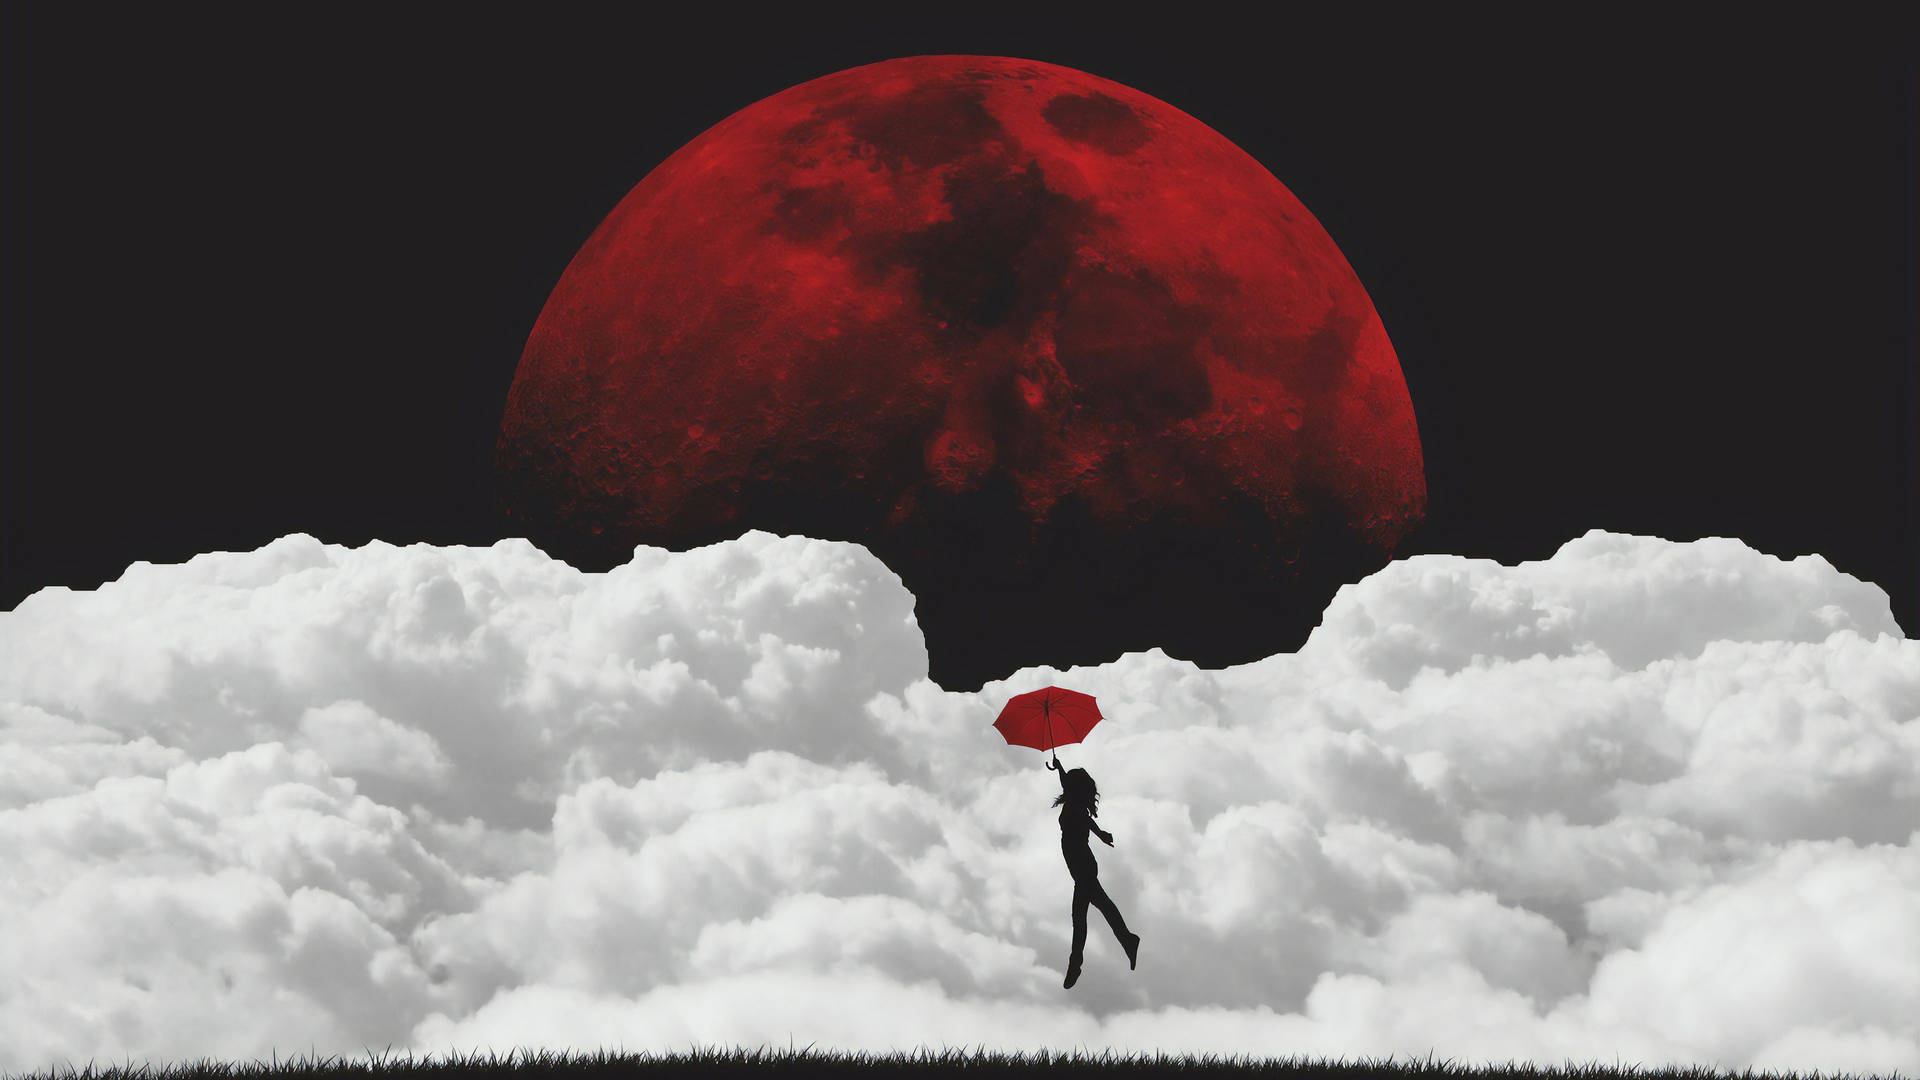 Moon 4k Red Aesthetic Girl With Red Umbrella Wallpaper